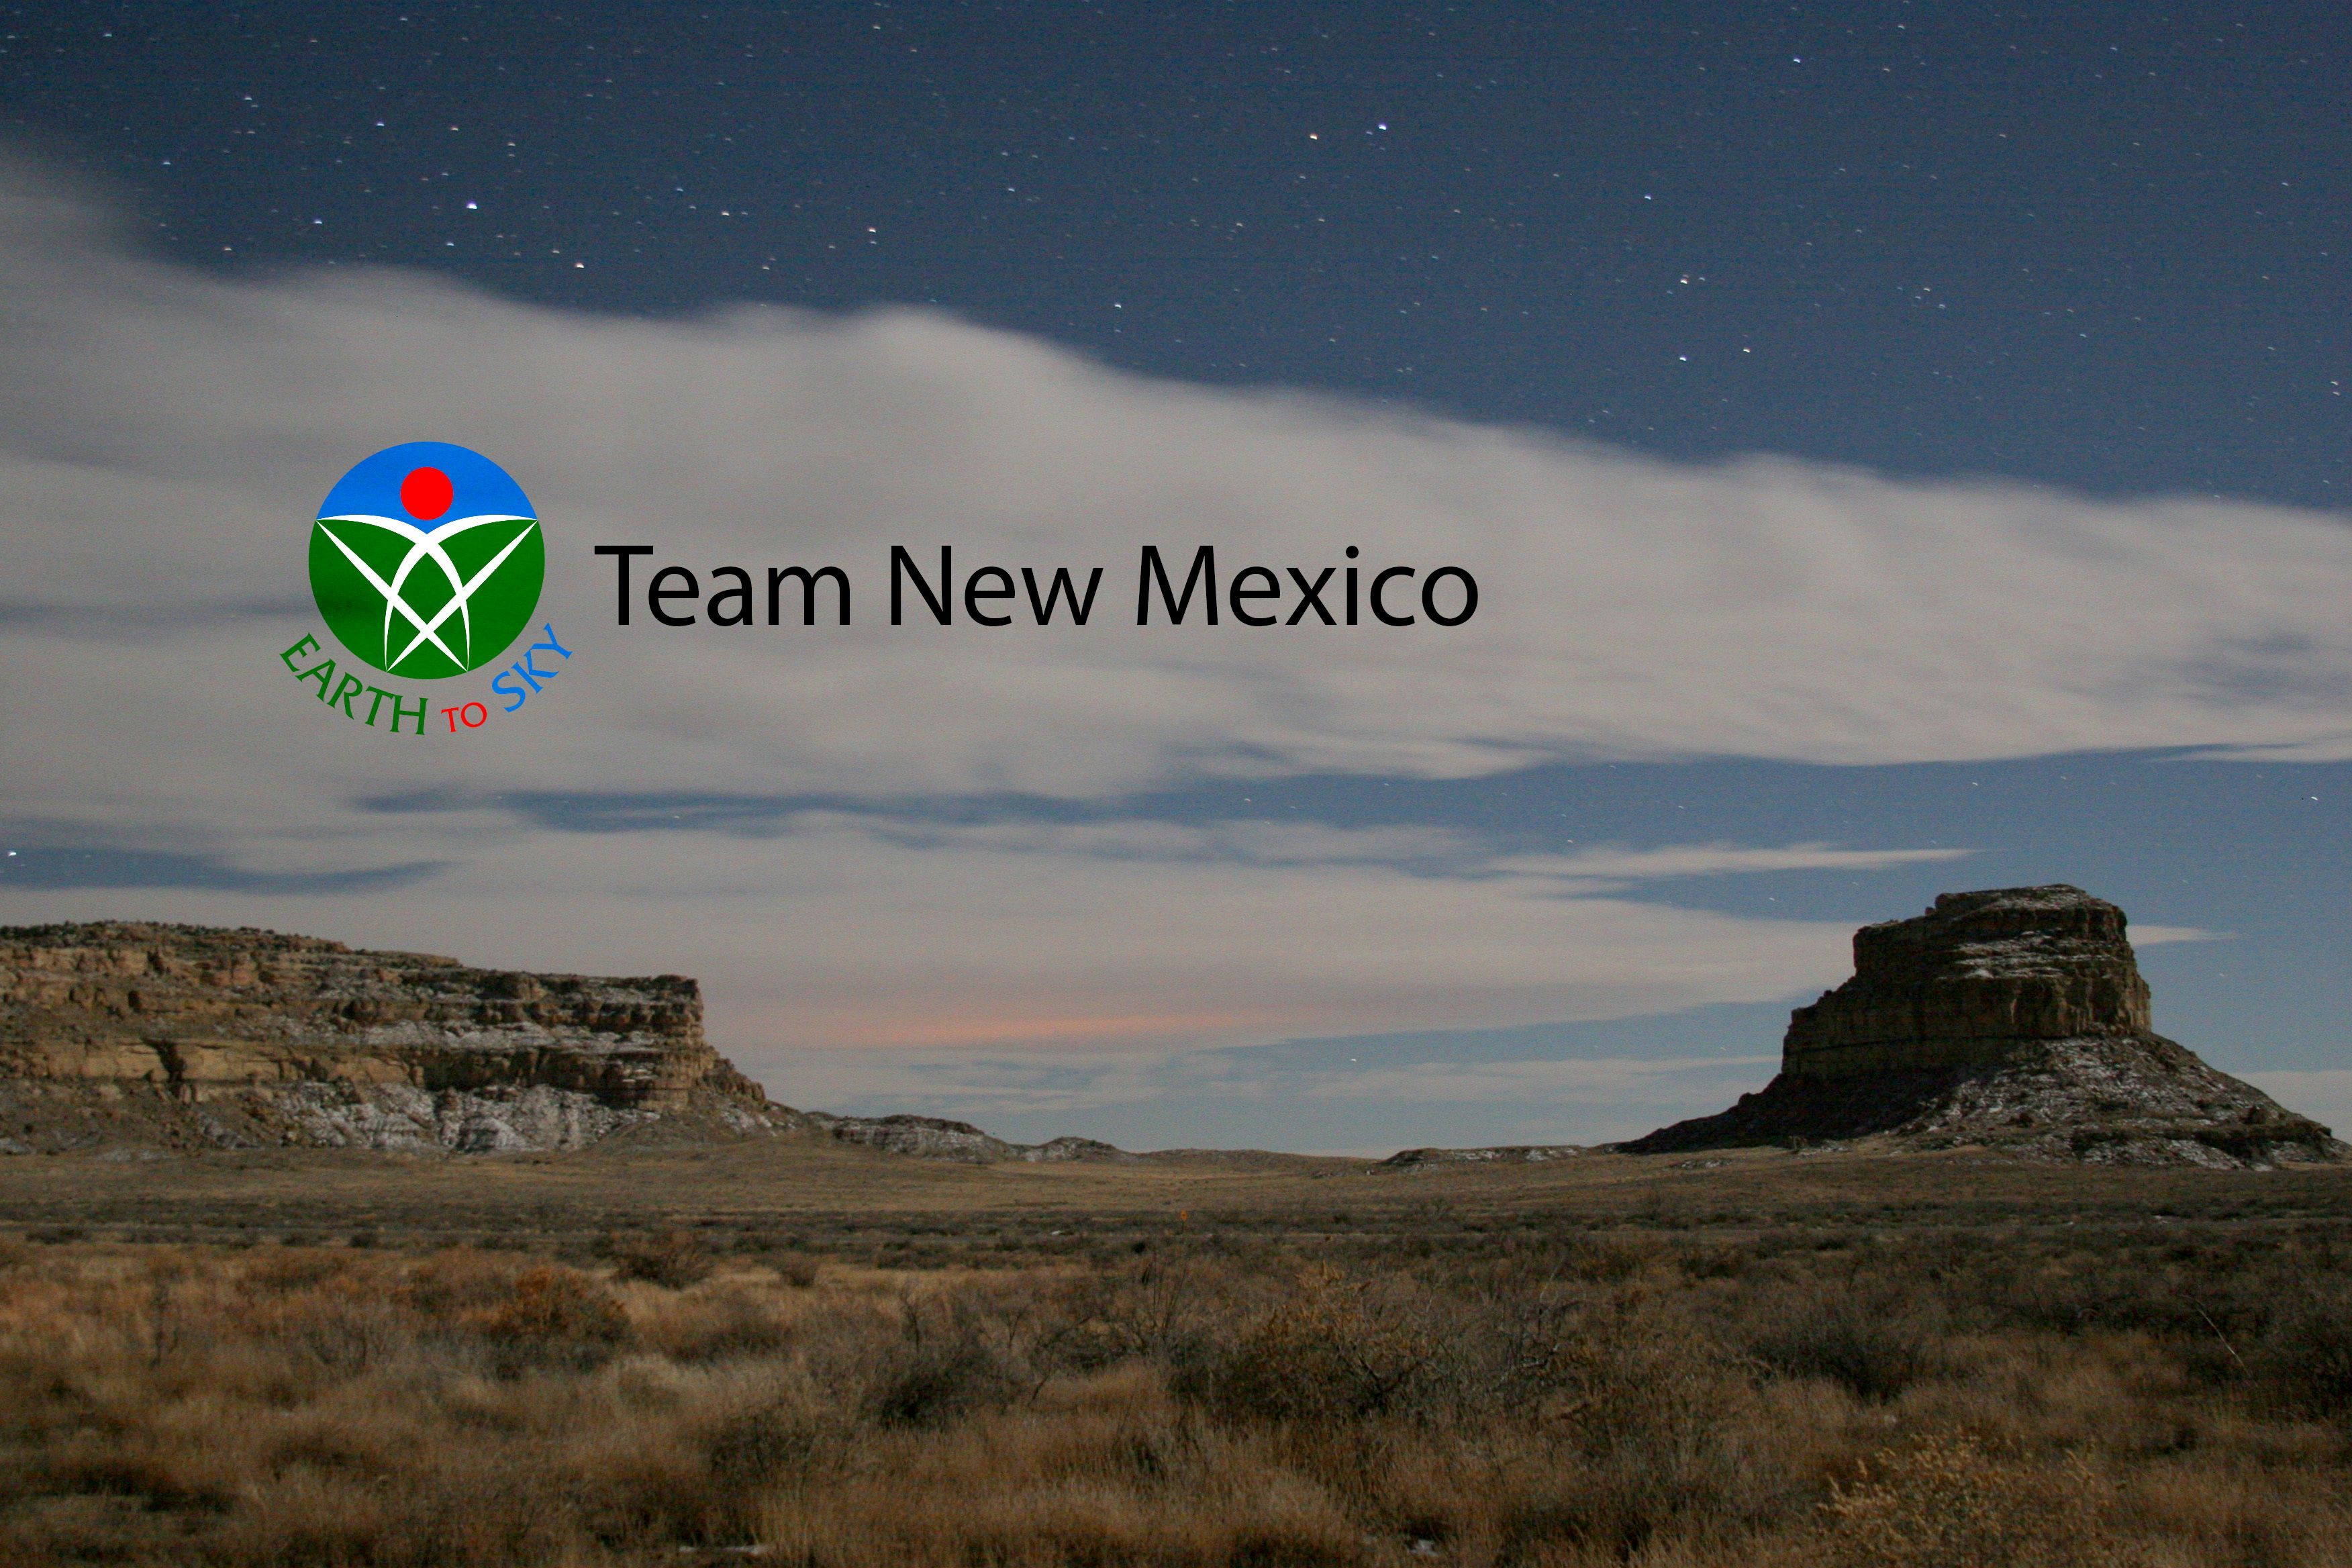 Earth to Sky Team New Mexico appears over a nighttime image of Fajada Butte